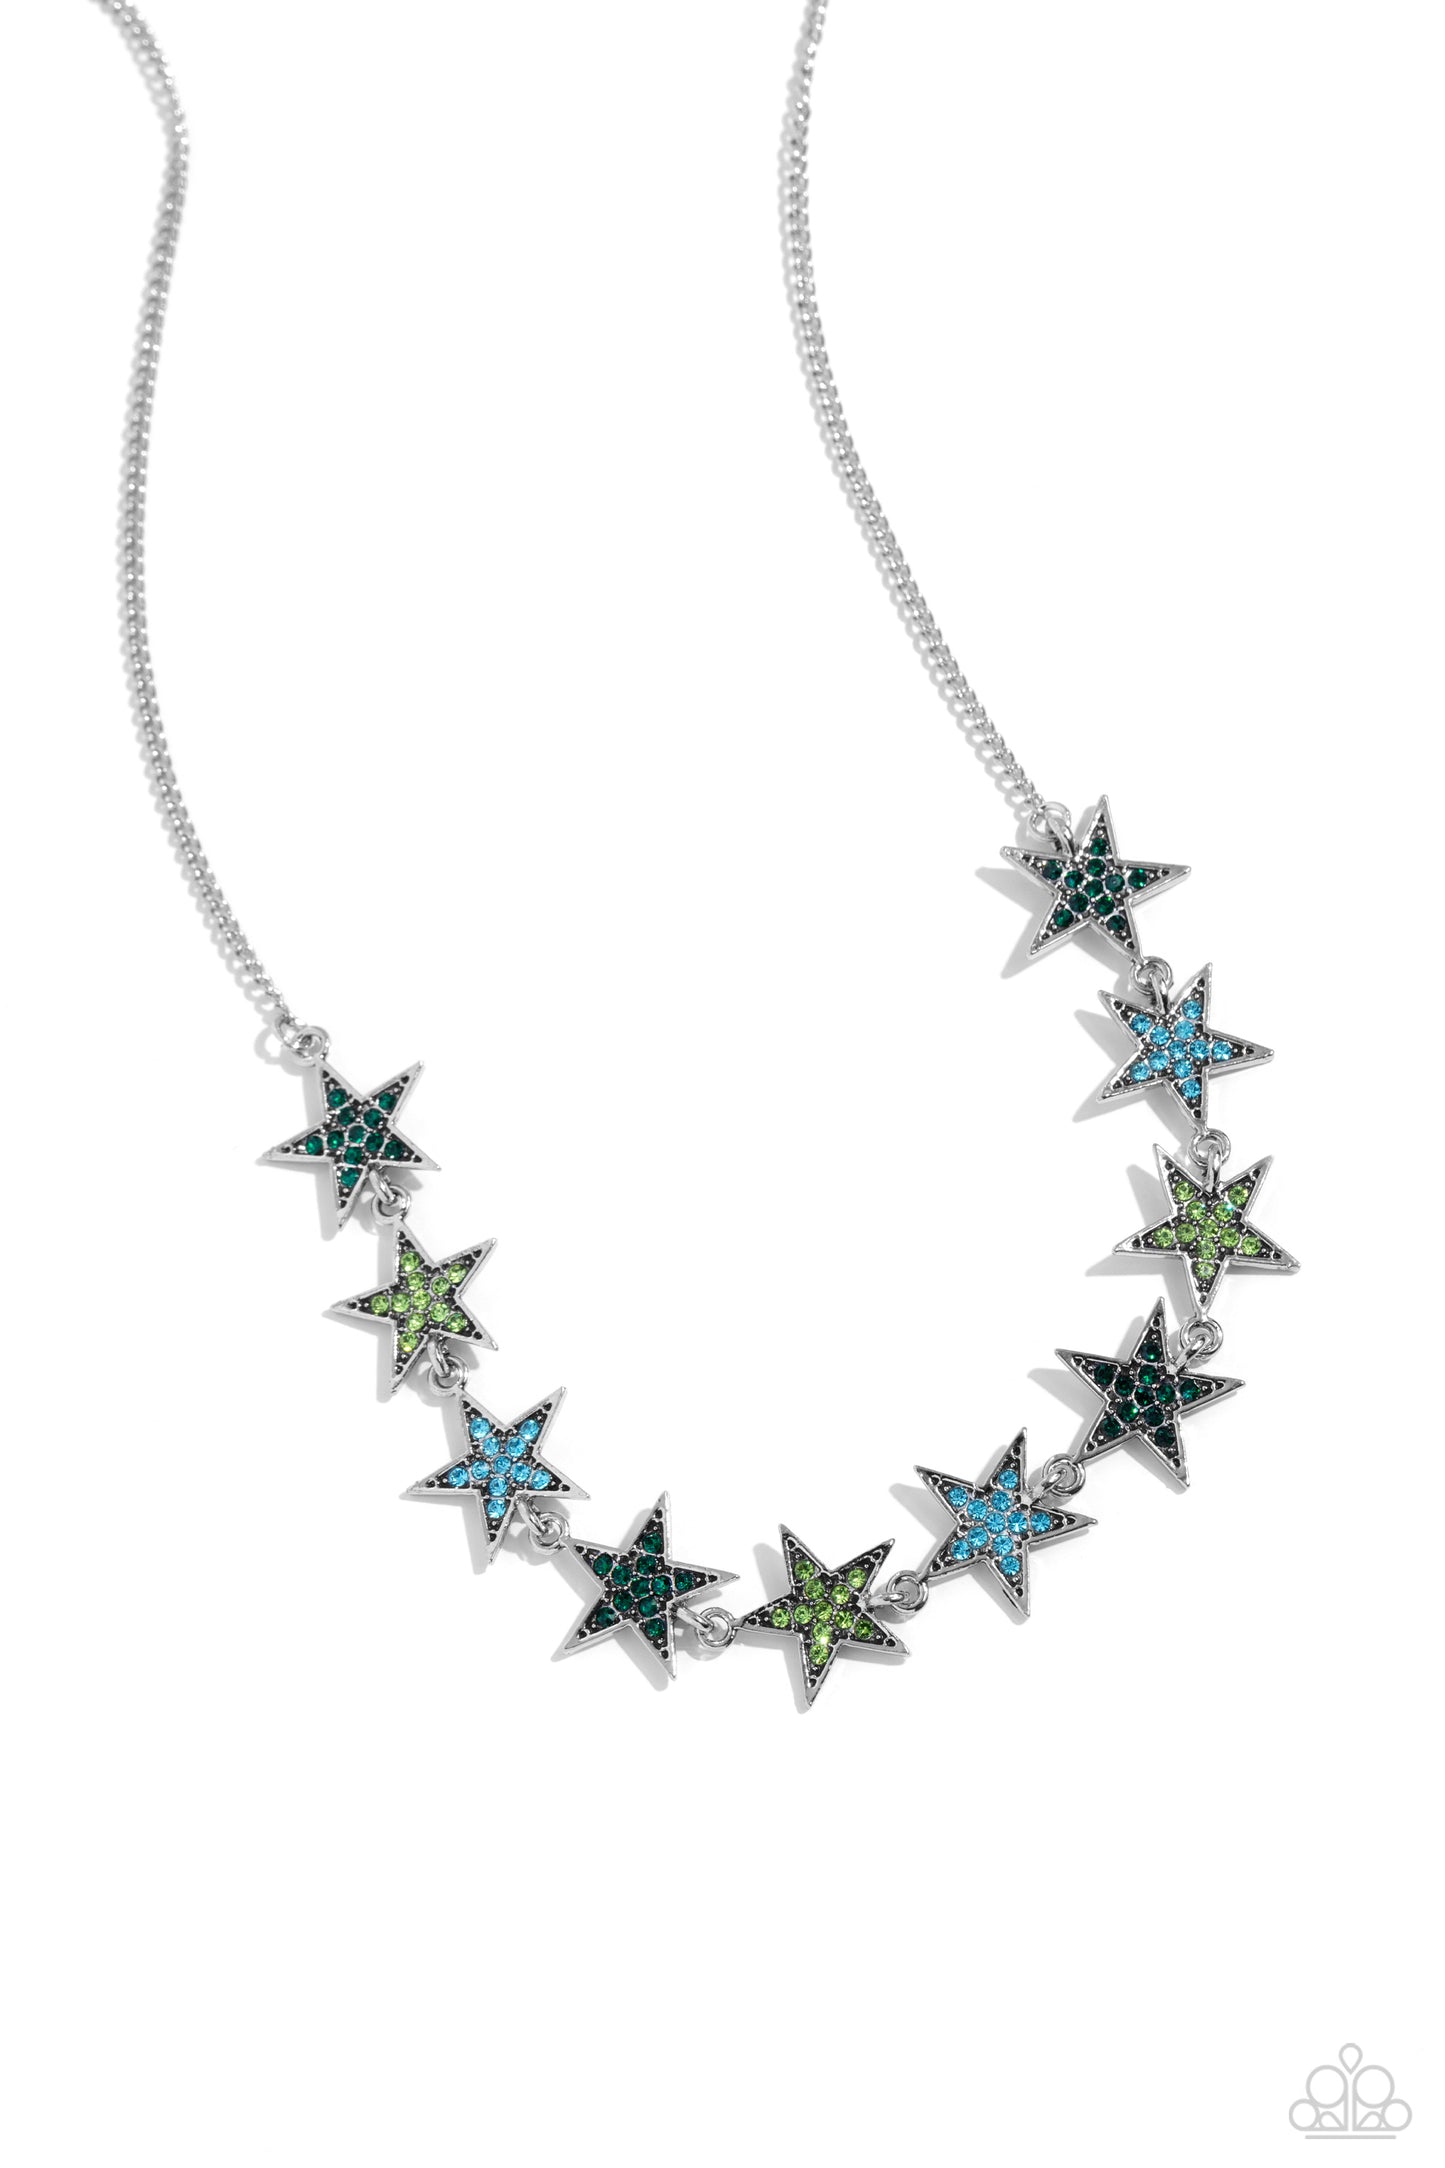 <p>Silver stars dotted with emerald, peridot, and aquamarine rhinestones connect to a classic silver chain for an out-of-this-world stellar display. Features an adjustable clasp closure.</p> <p><i> Sold as one individual necklace. Includes one pair of matching earrings.</i></p>